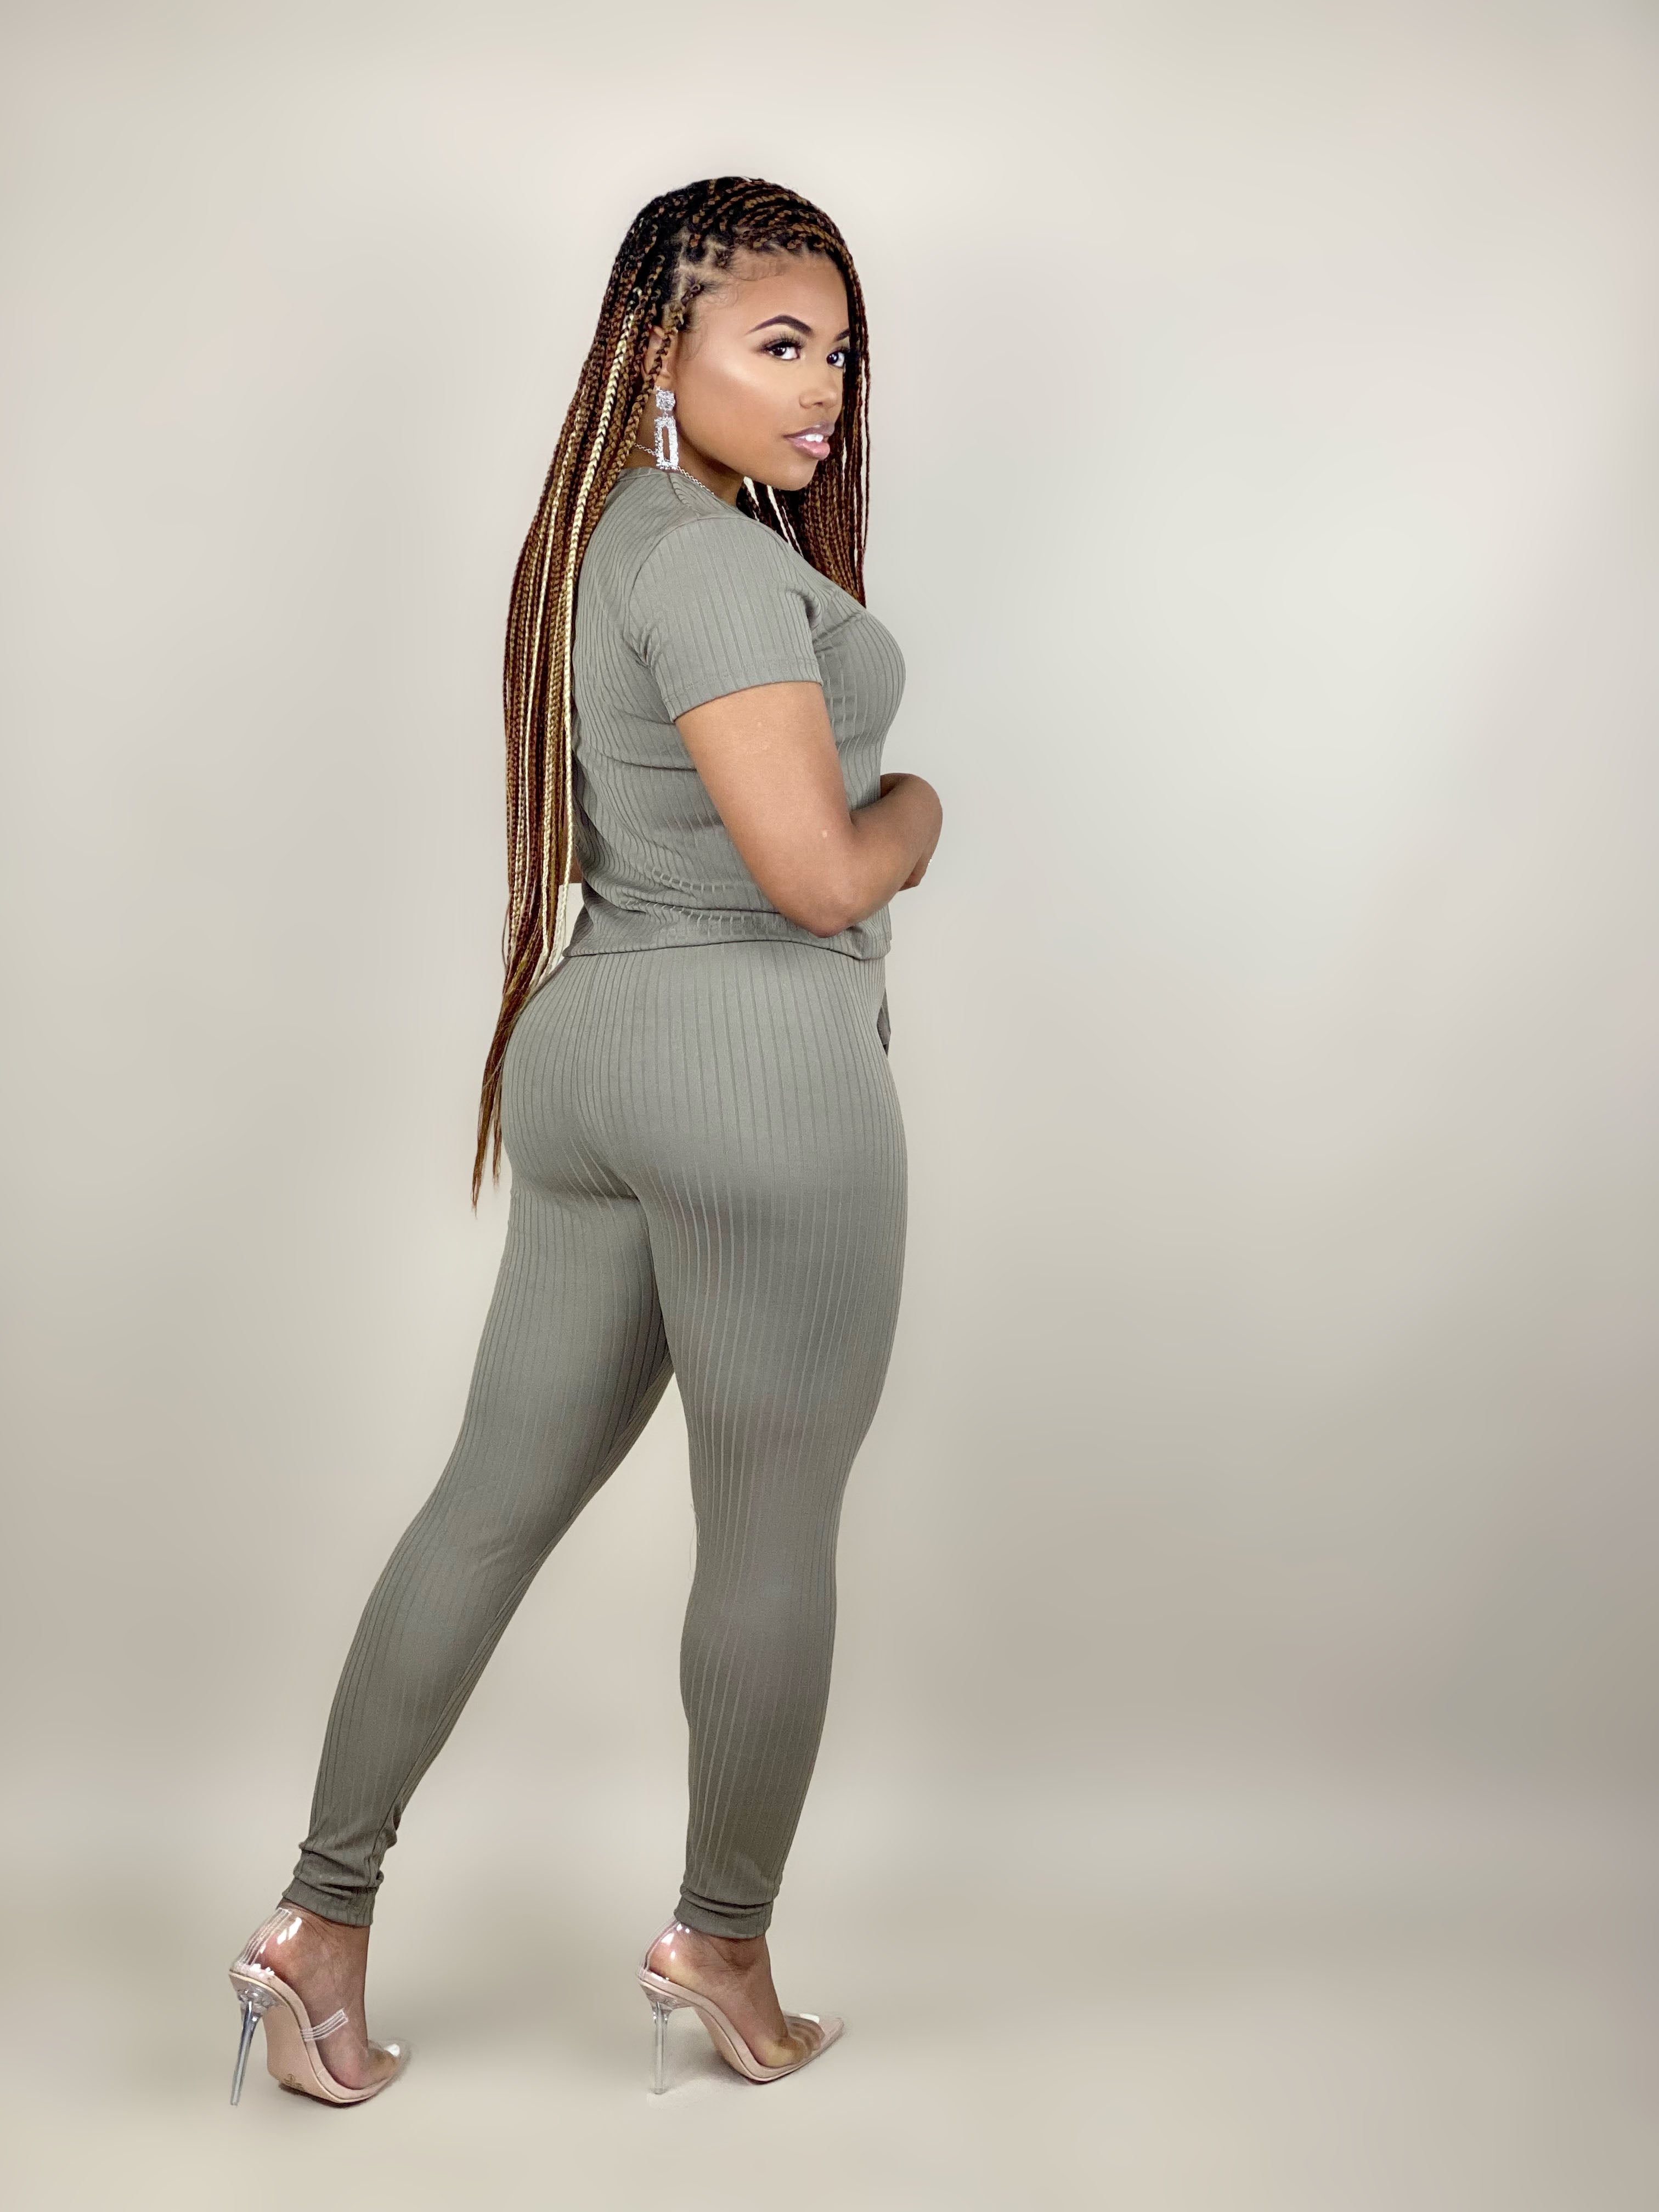 Stay Ready Ribbed Legging Set - KASH Queen